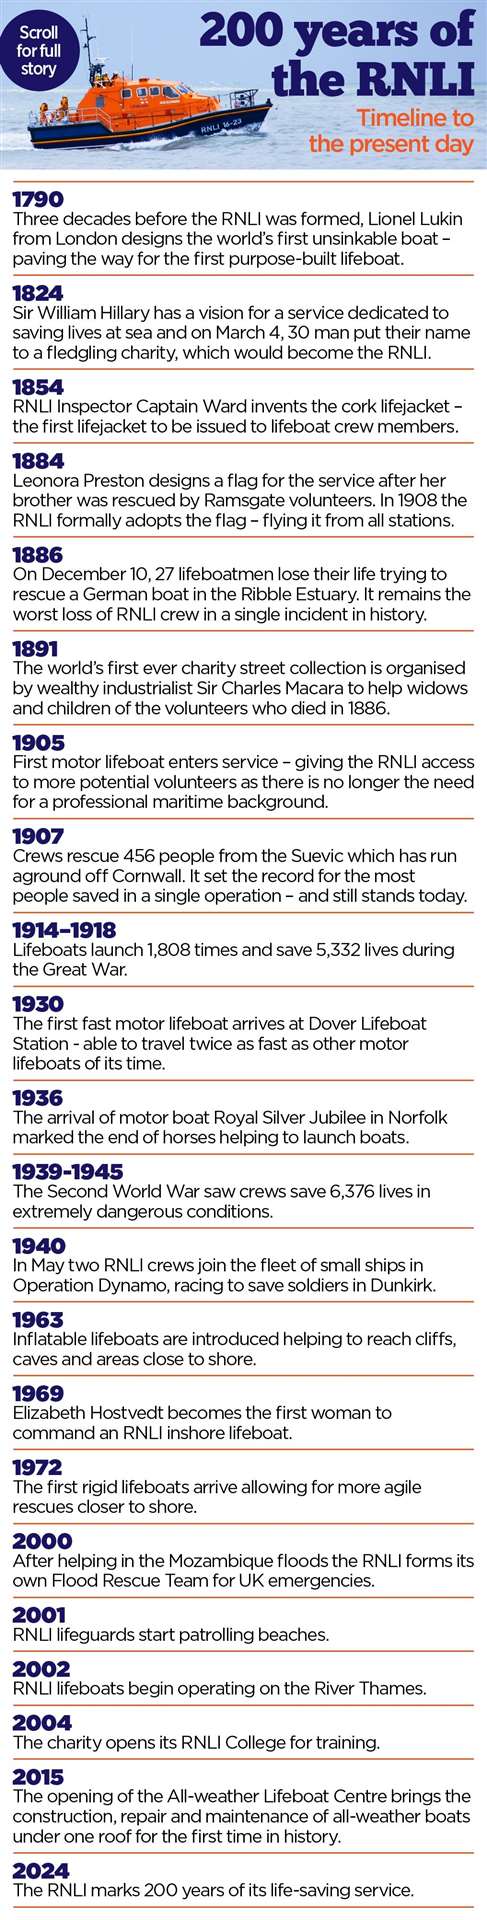 Two hundreds years of RNLI history